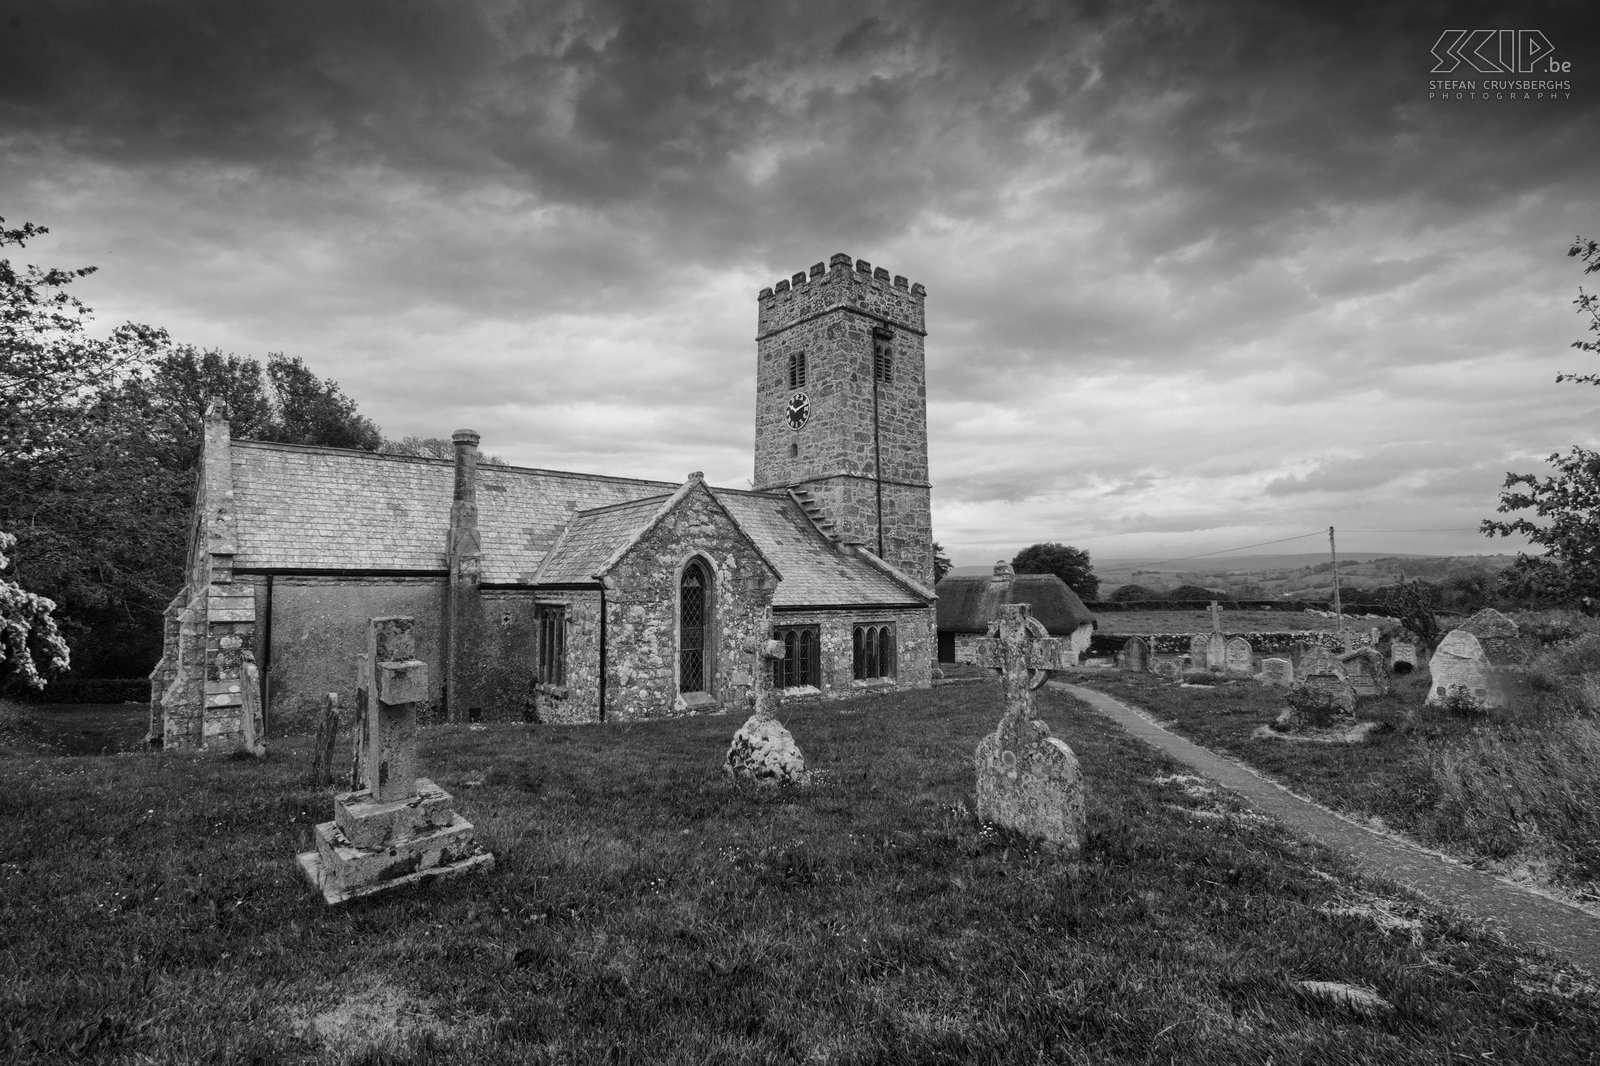 Church of Buckland-in-the-Moor The old church of Buckland-in-the-Moor. Stefan Cruysberghs